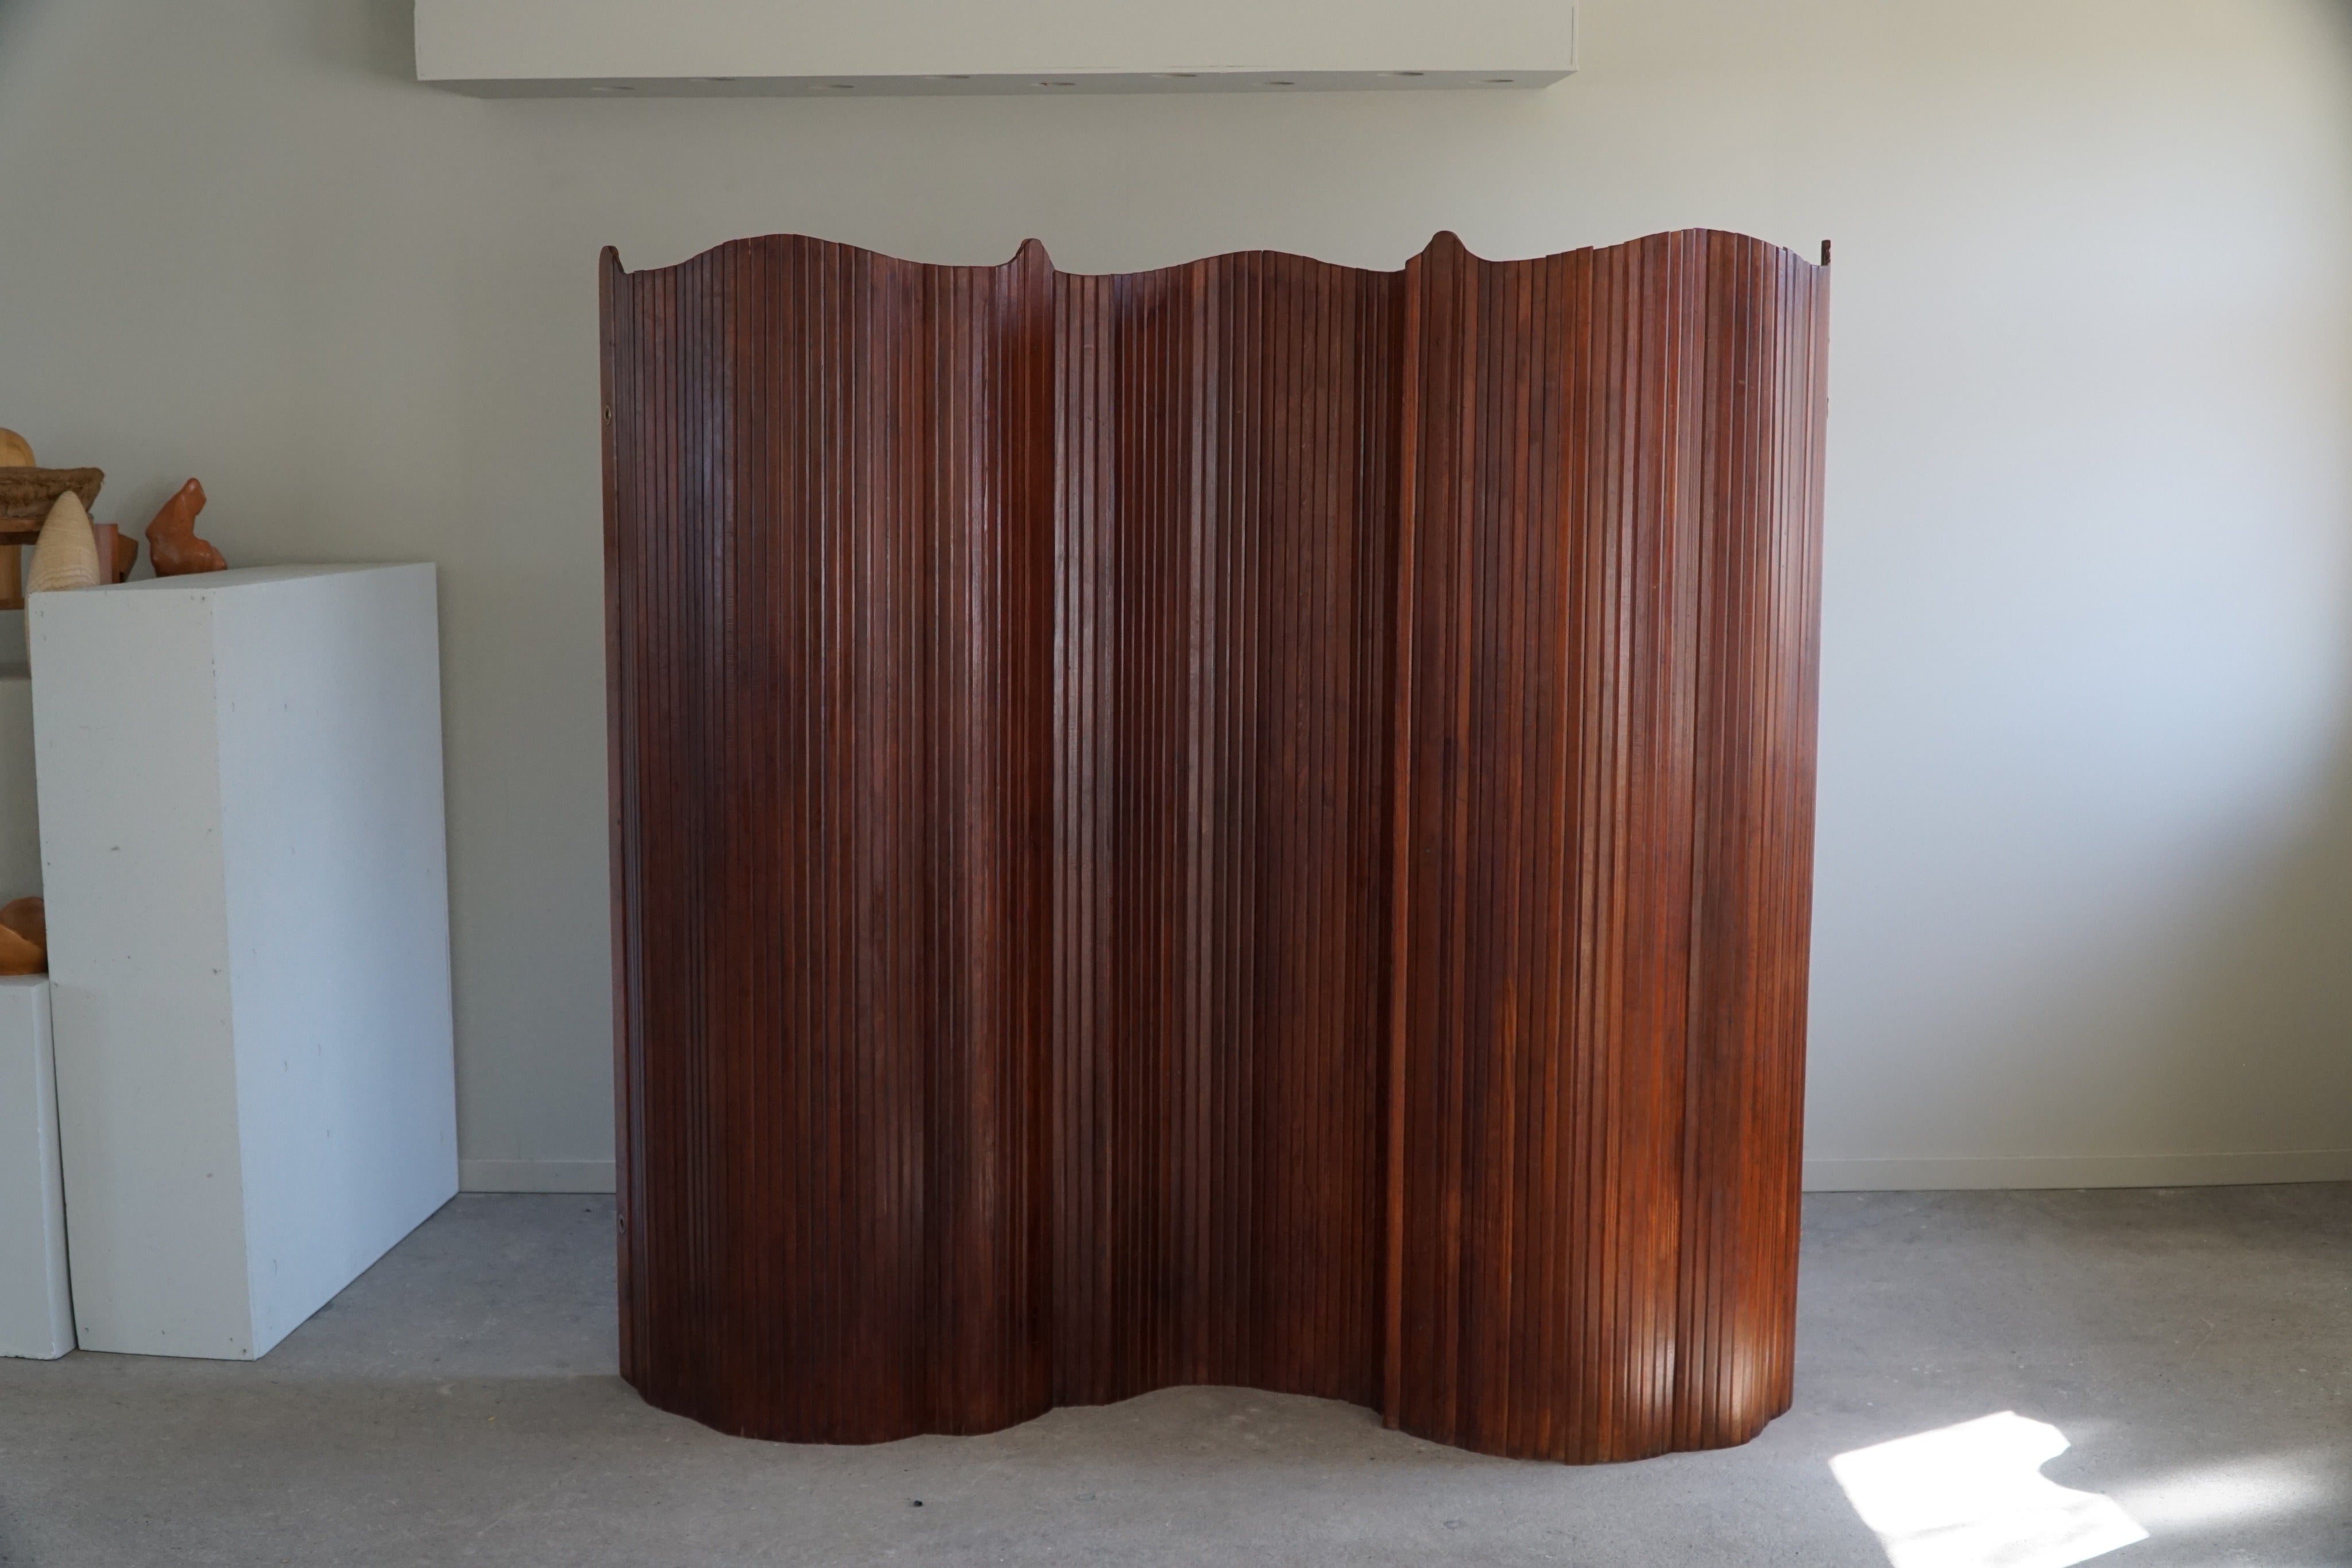 This French Art Deco tambour room divider is a stunning piece of furniture attributed to the French cabinetmaker Jomaine Baumann and made in the 1930s. Crafted in pine, the tambour panels are intricately woven to create a flexible, undulating